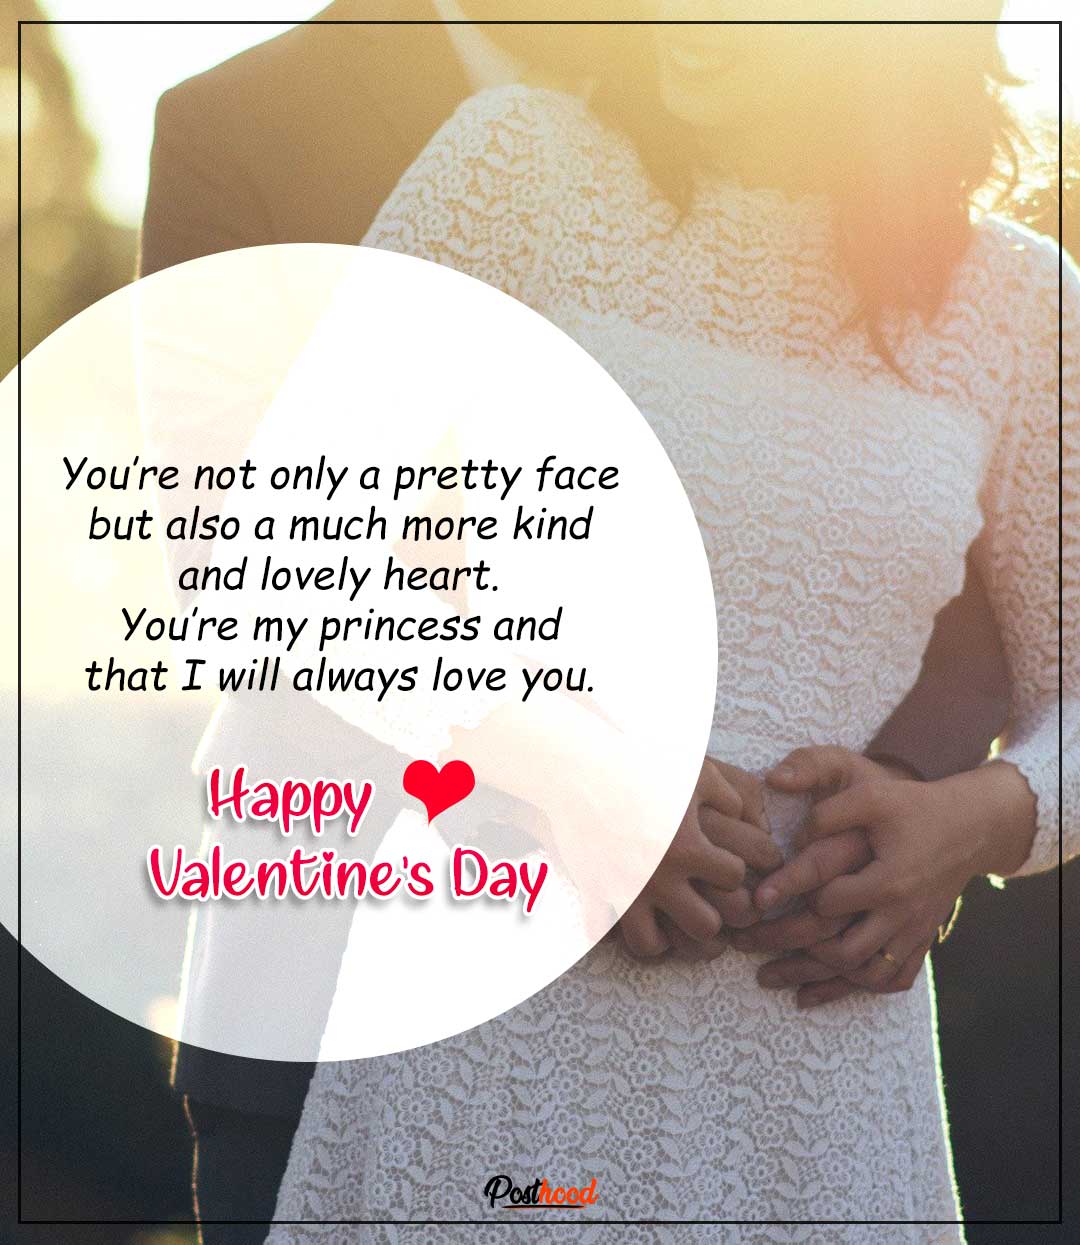 Show your love with these cute and sweet love messages to her. Let your girlfriend feel the warmth of your love through these 25 romantic love messages. 